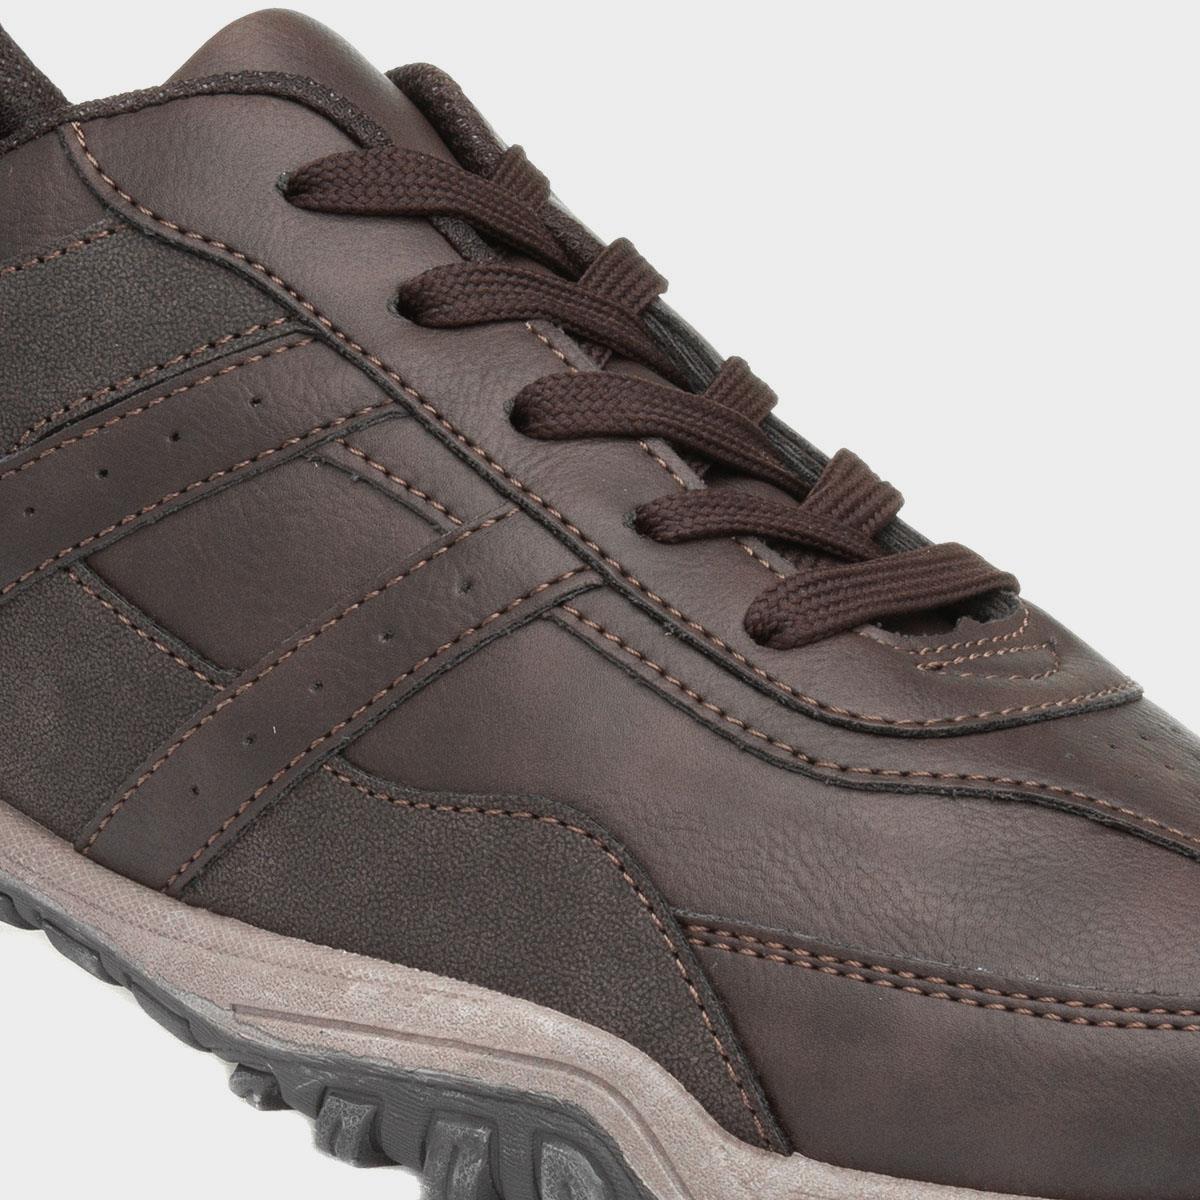 Beckett Mens Lace Up Casual Shoe in Brown-522025 | Shoe Zone